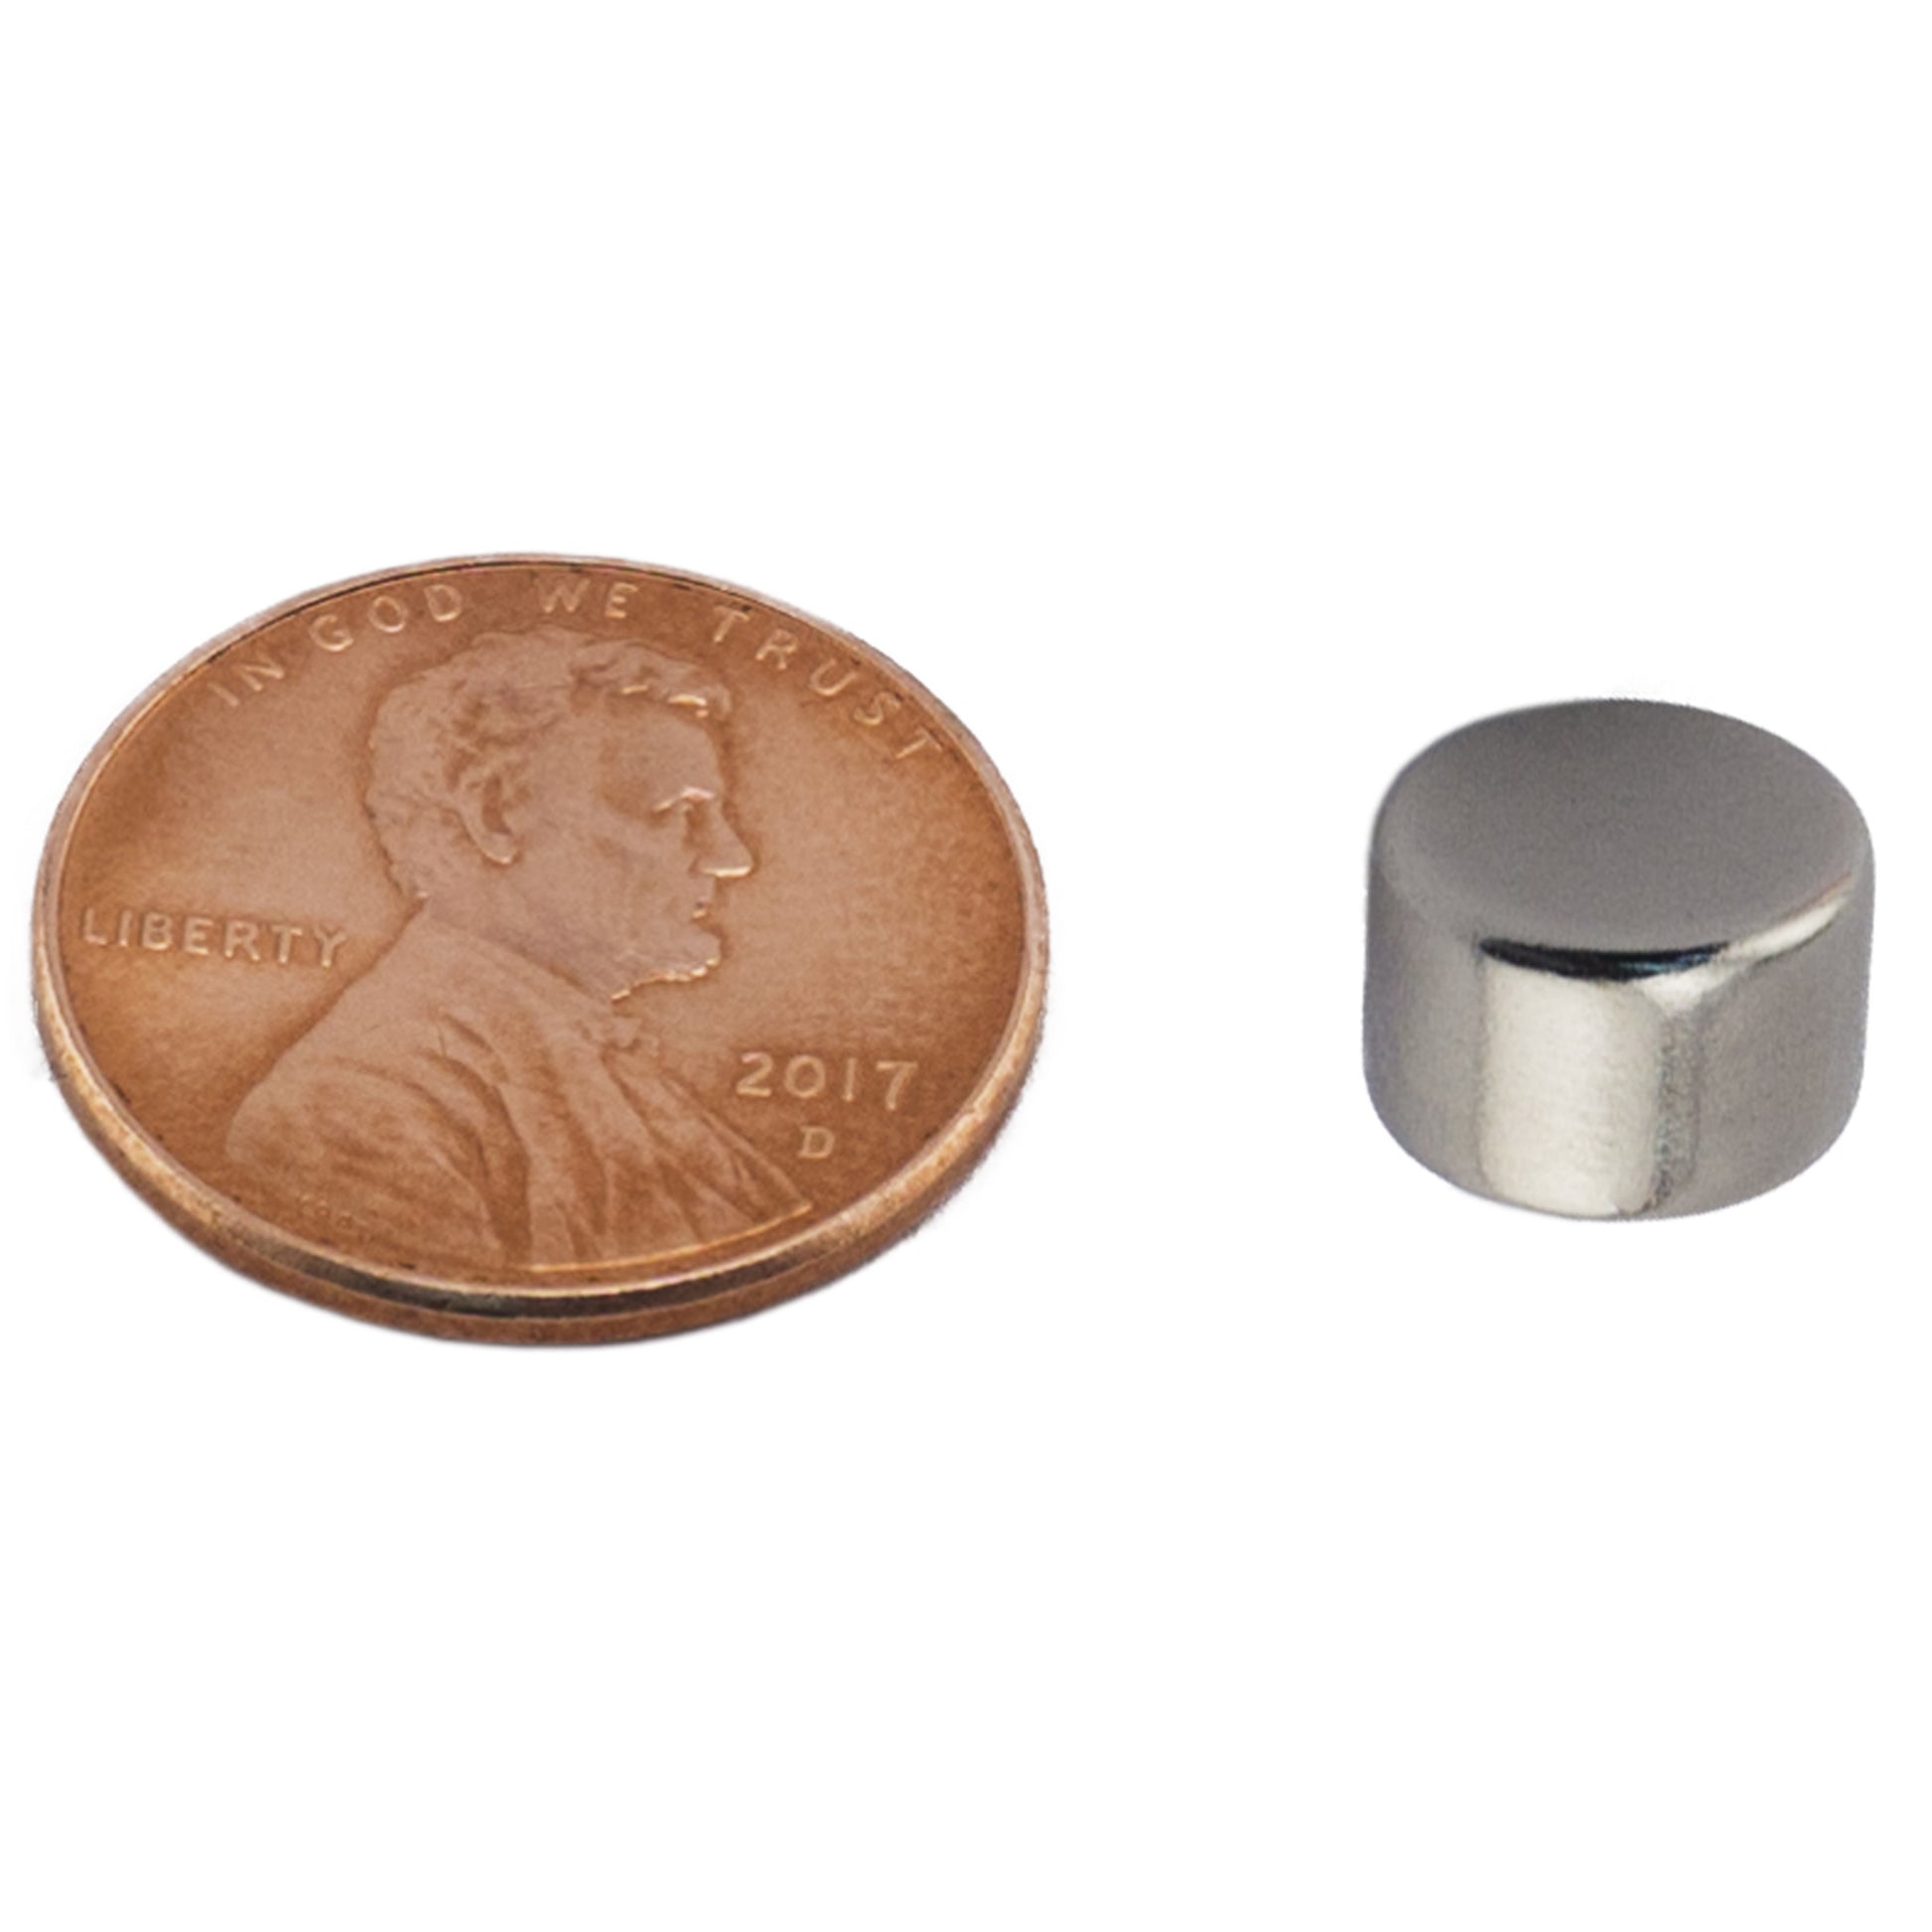 Load image into Gallery viewer, ND003750N Neodymium Disc Magnet - Compared to Penny for Size Reference